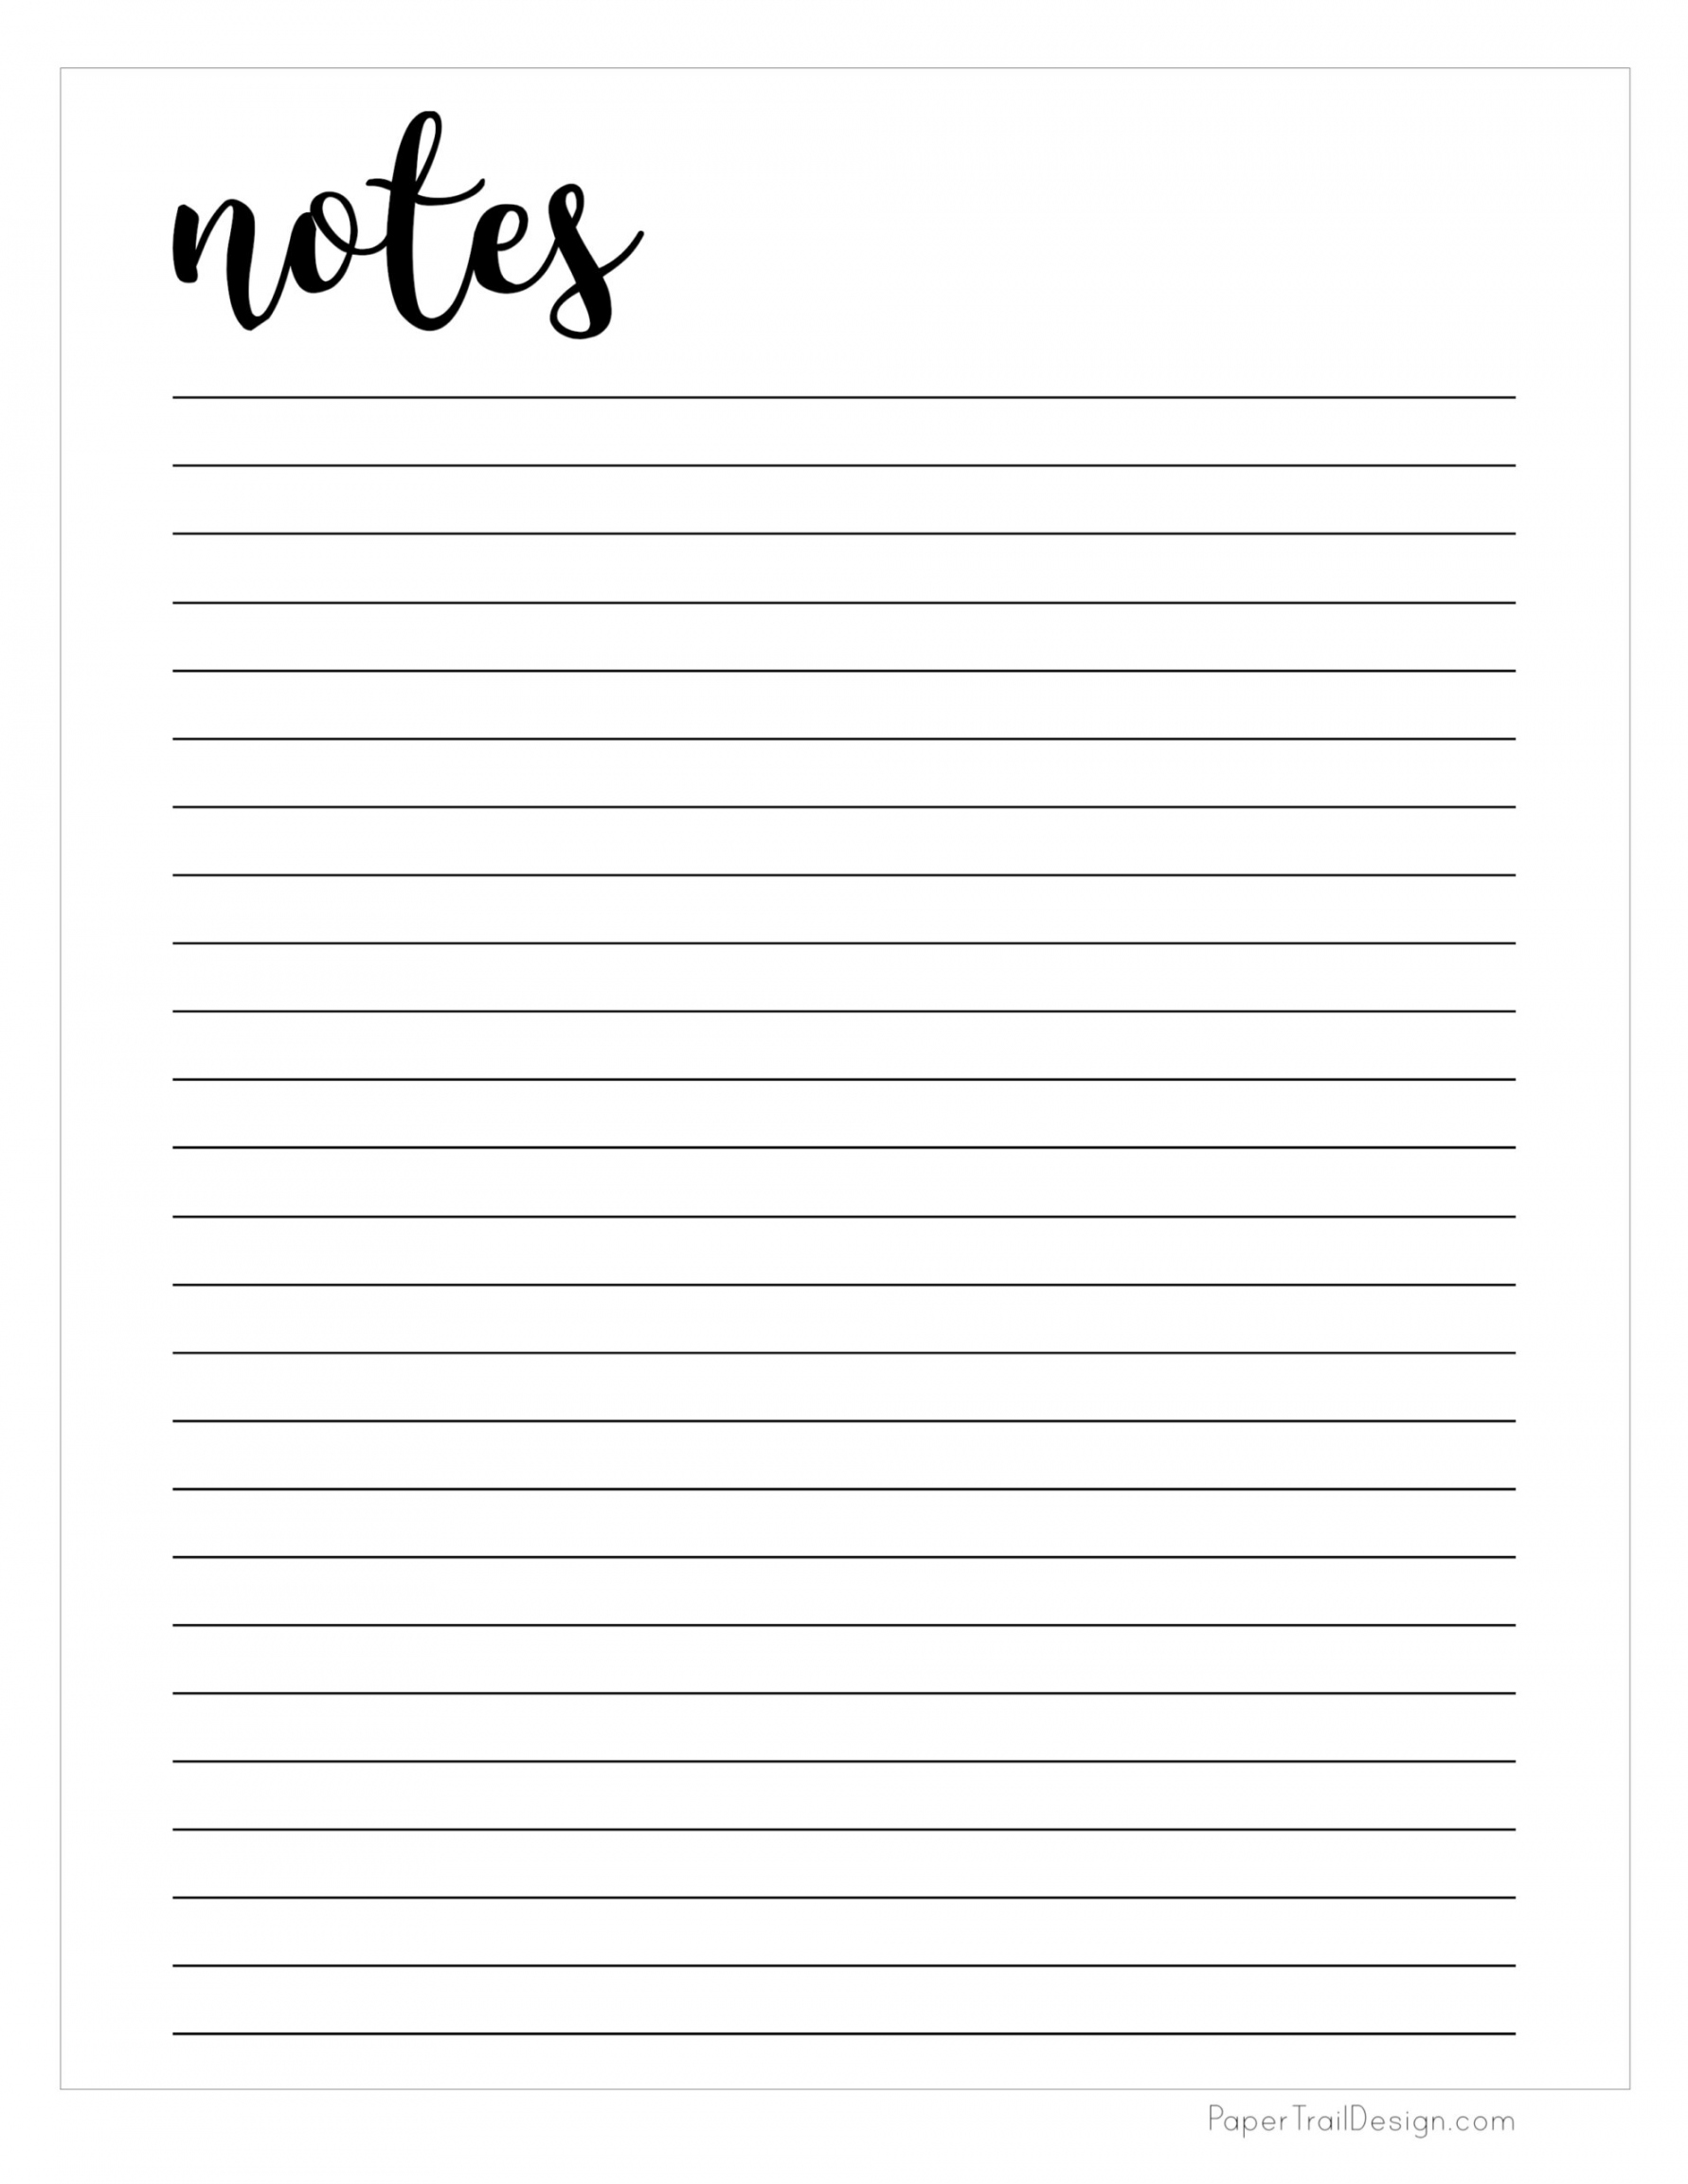 Free Printable Notes Template - Paper Trail Design - FREE Printables - Free Printable Note Taking Templates